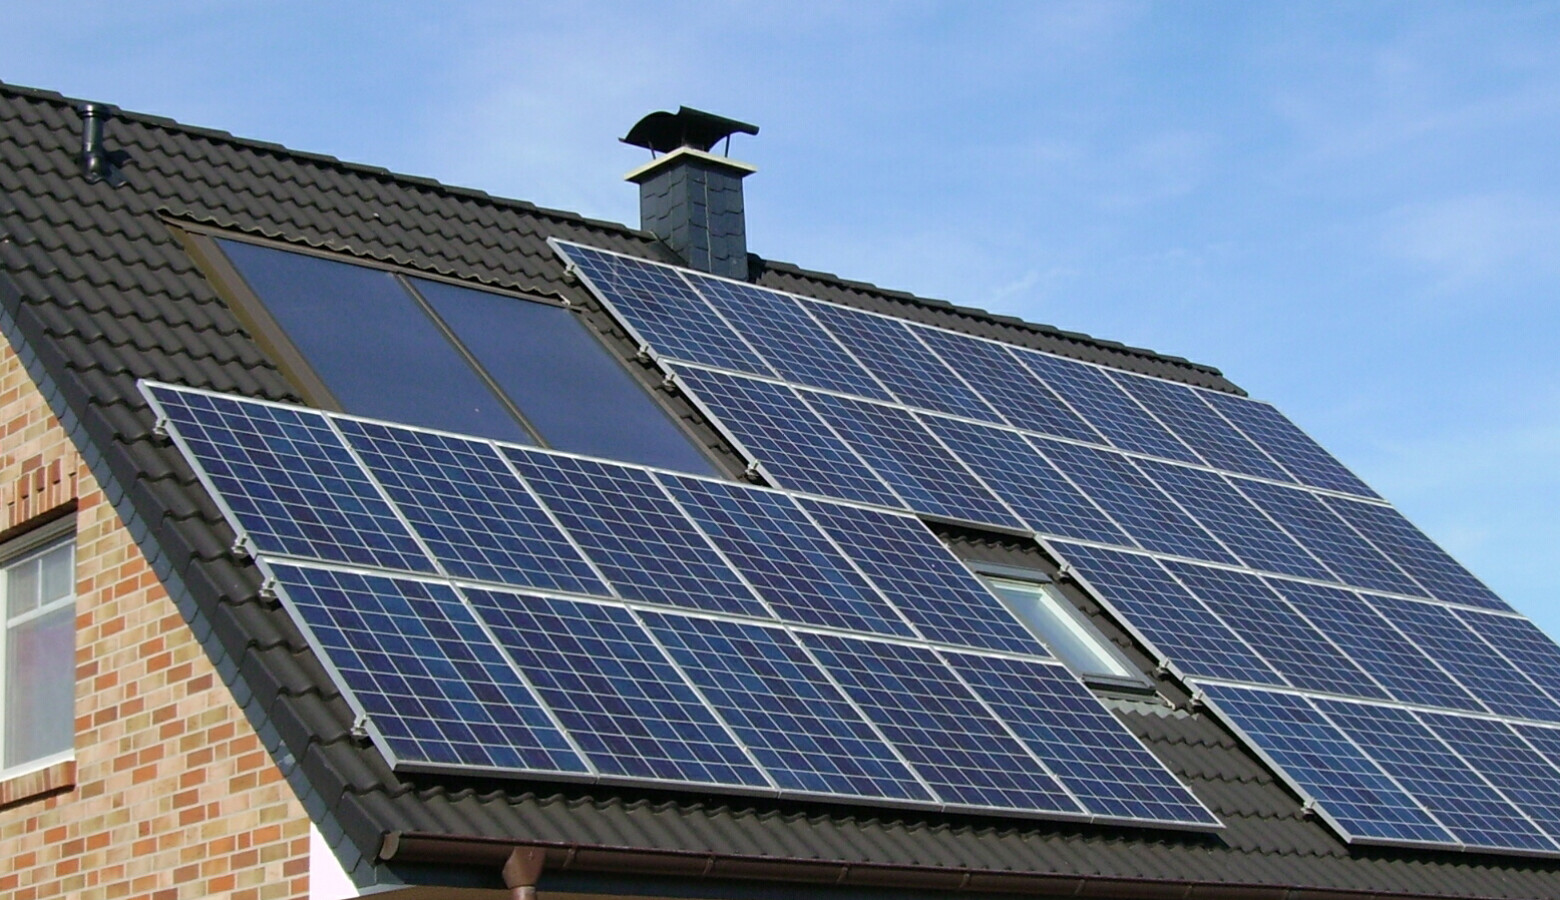 Solar panels on a roof. Higher net metering rates are set to expire in Indiana by July 2022. (Pujanak/Wikimedia Commons)